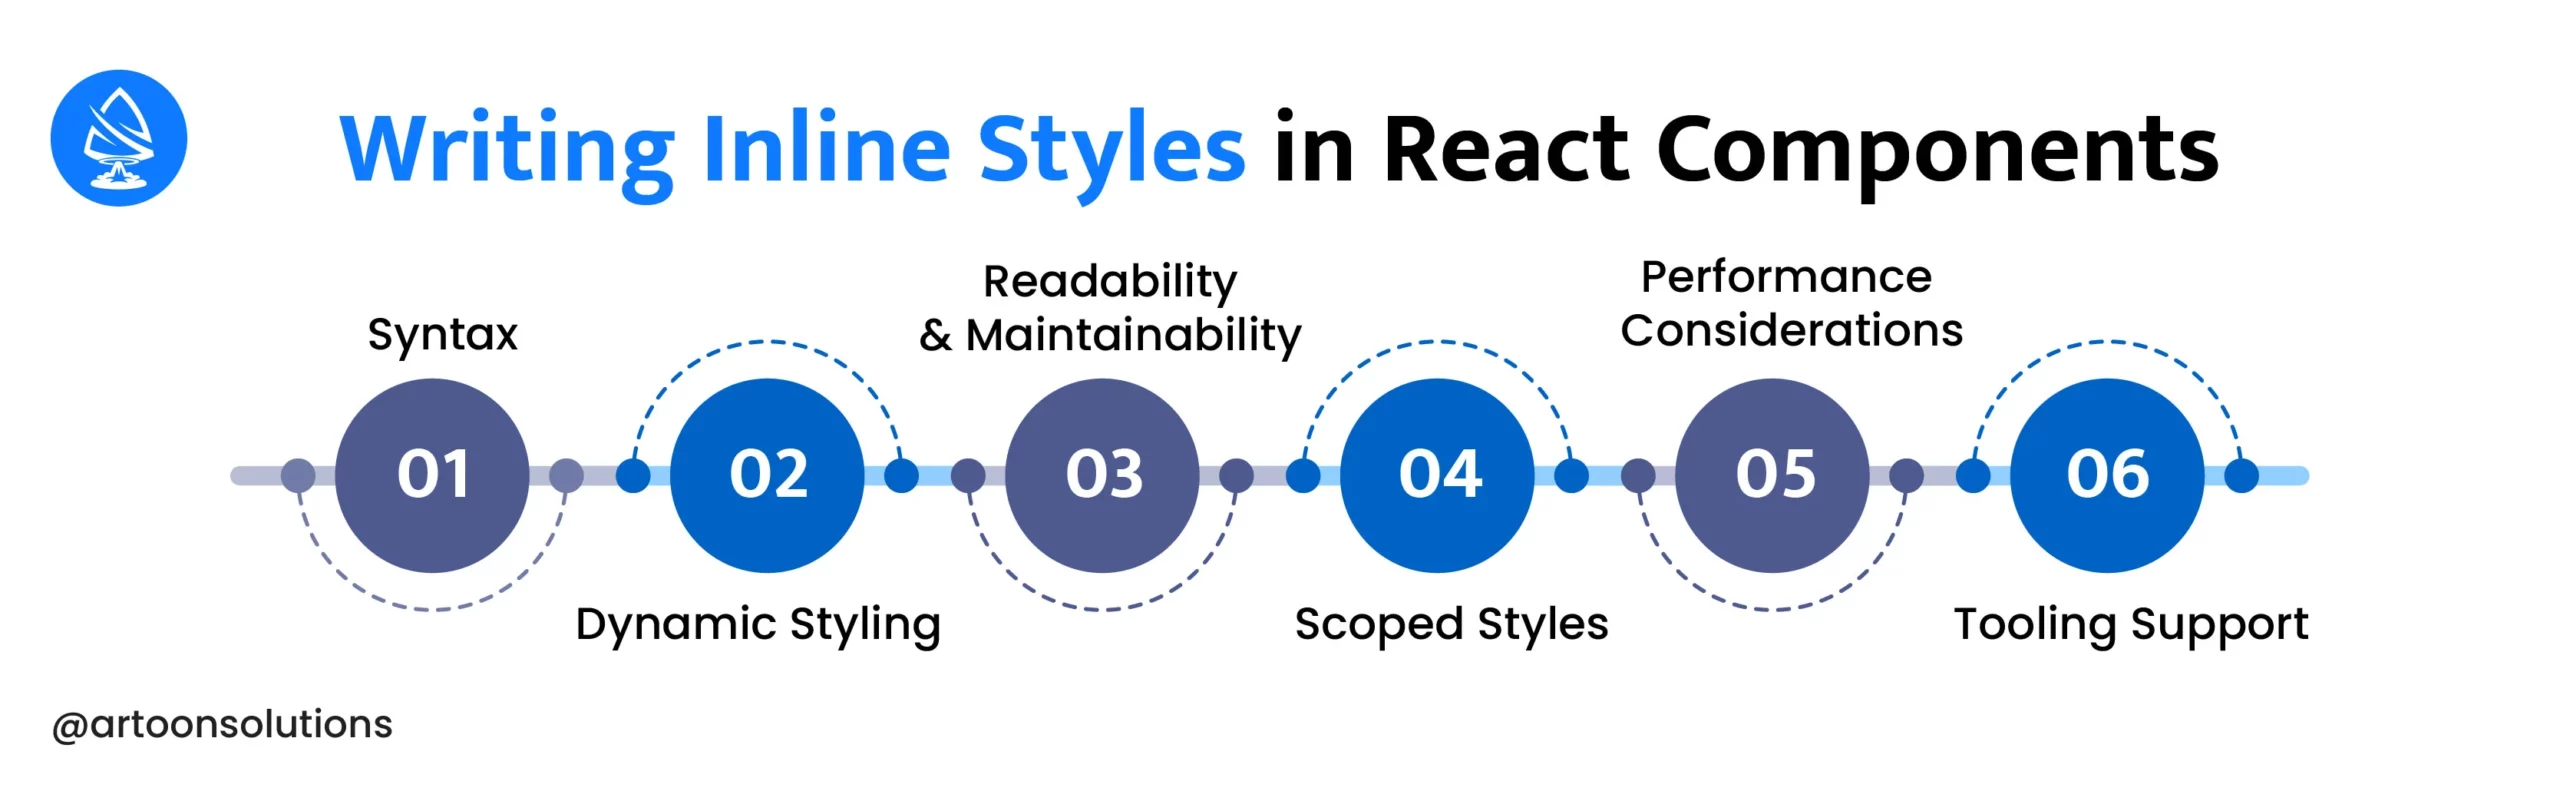 Writing Inline Styles in React Components